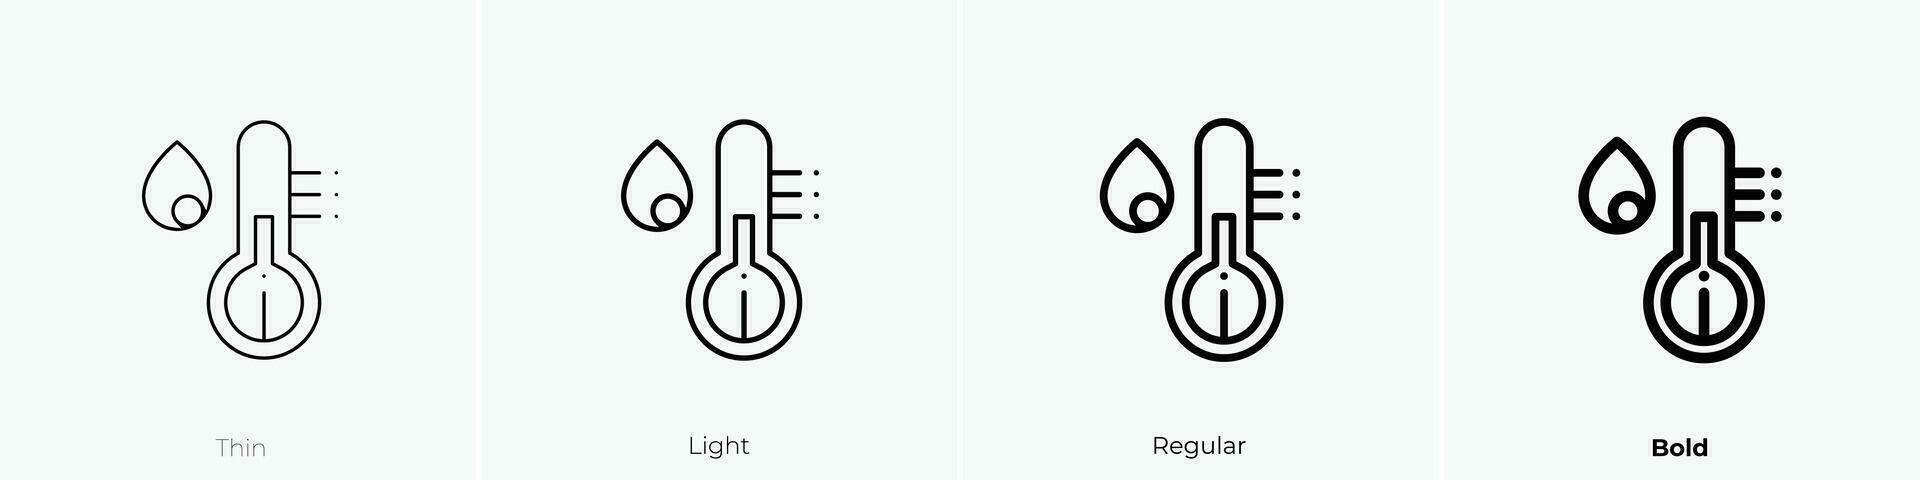 thermometer icon. Thin, Light, Regular And Bold style design isolated on white background vector